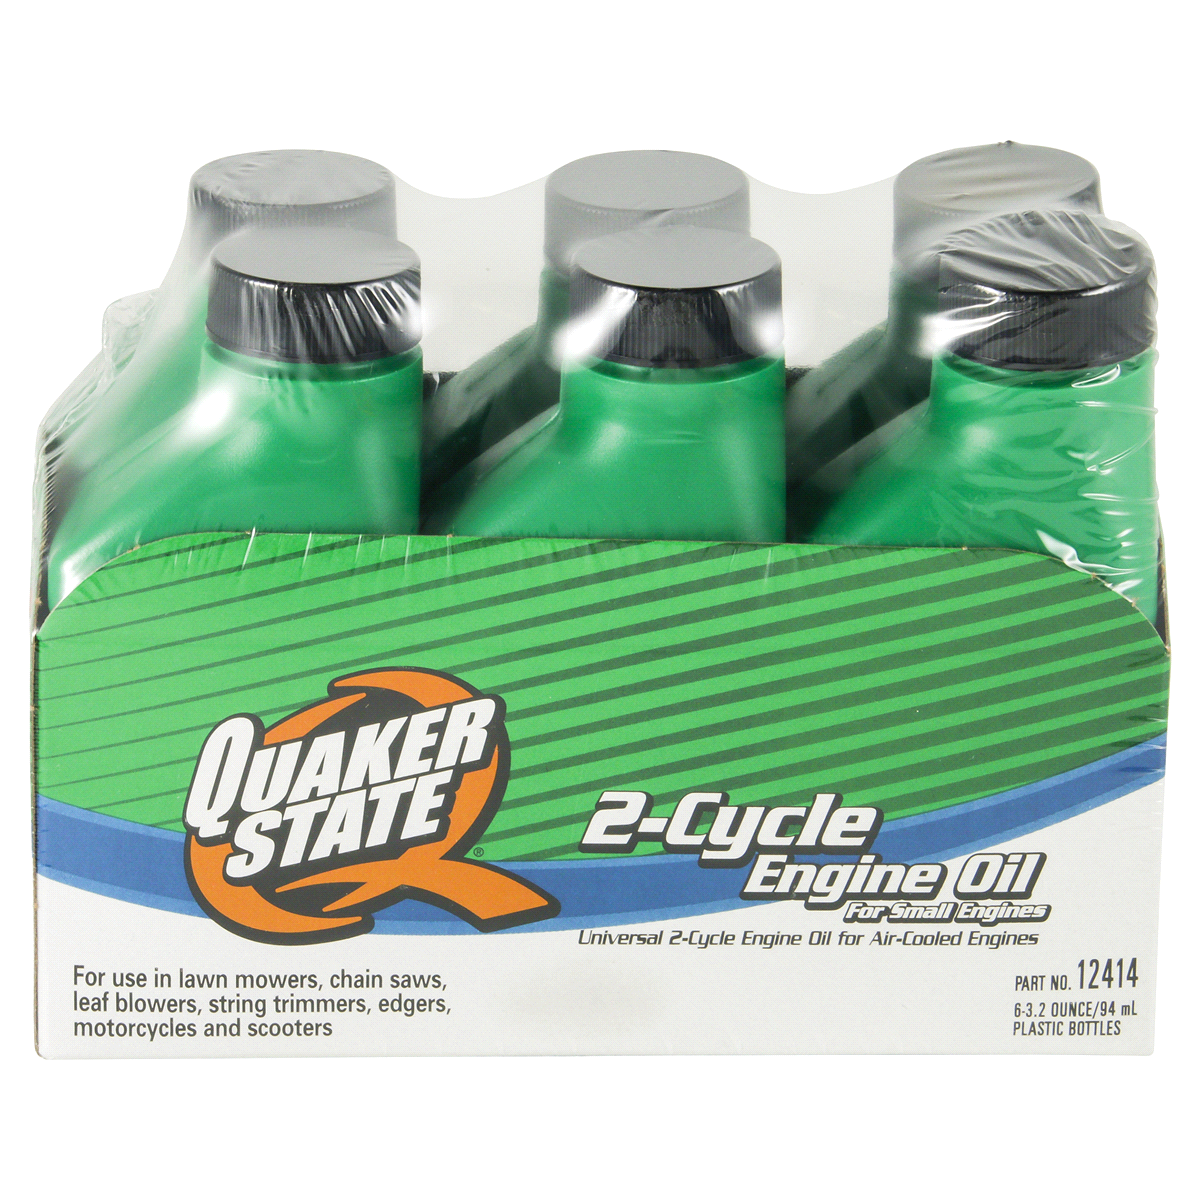 slide 1 of 3, Quaker State Universal 2-Cycle Engine Oil, 3.2 oz